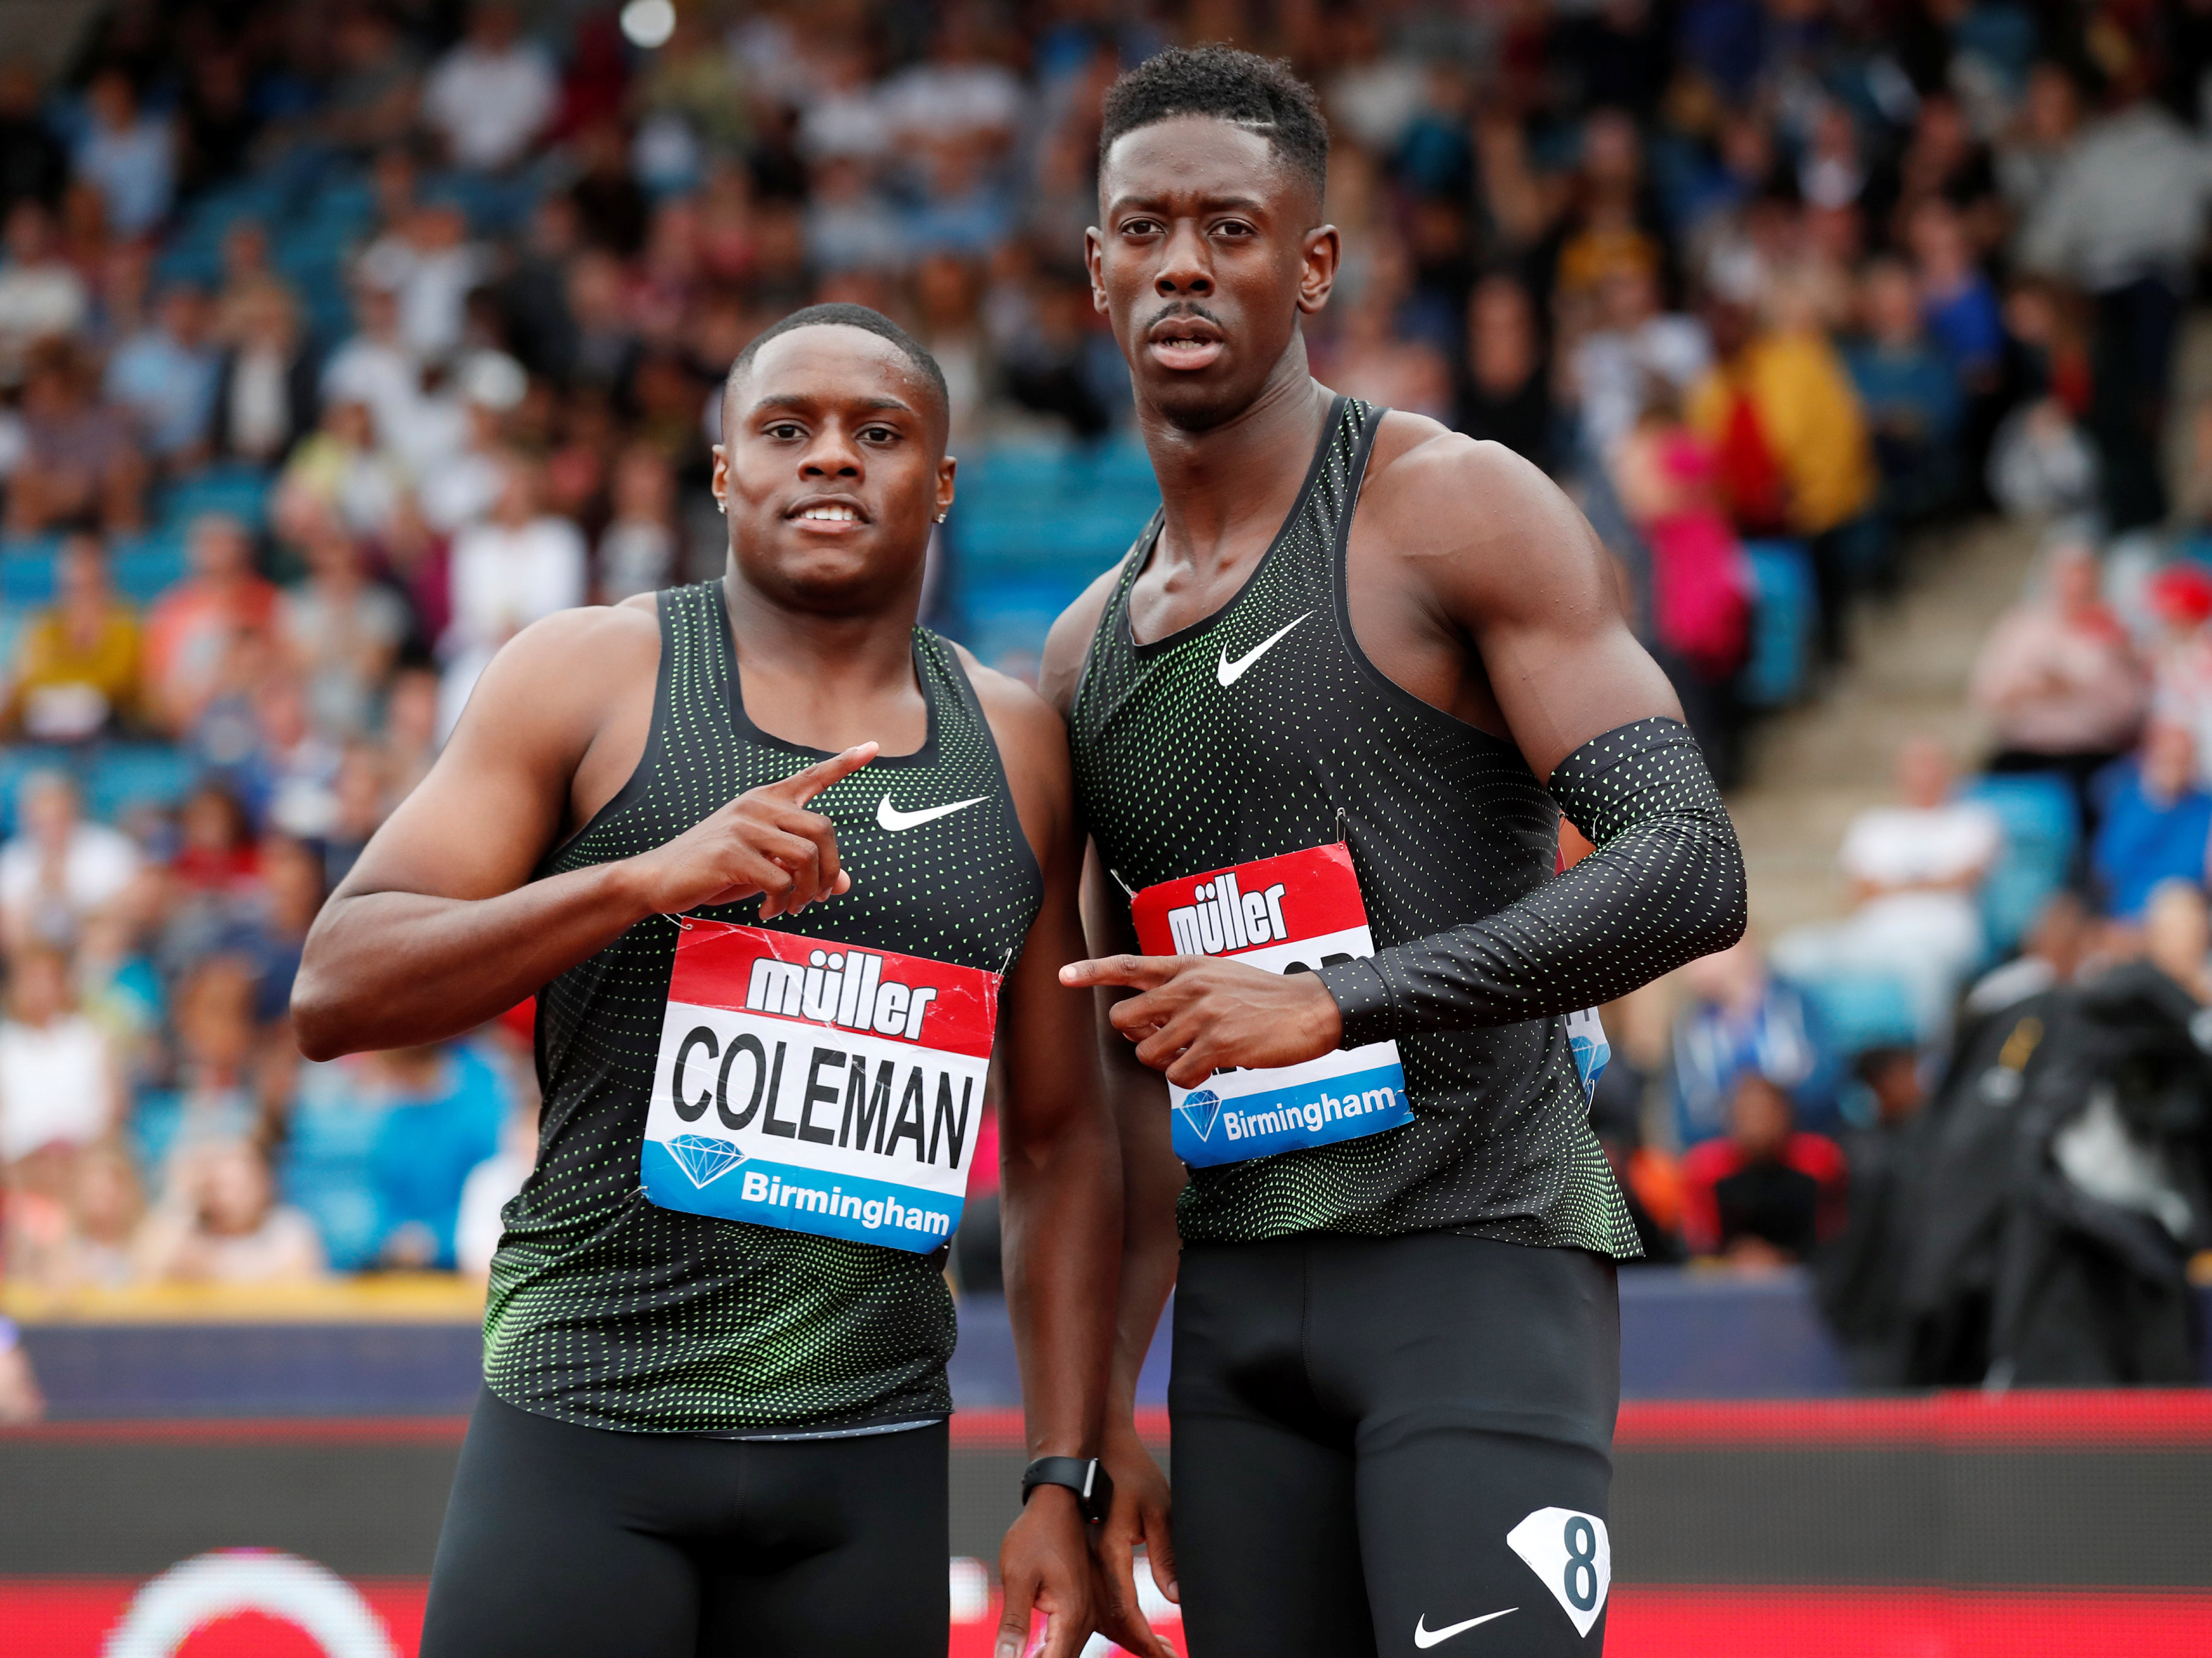 Athletics: Coleman edges Prescod by a thousandth in 100m